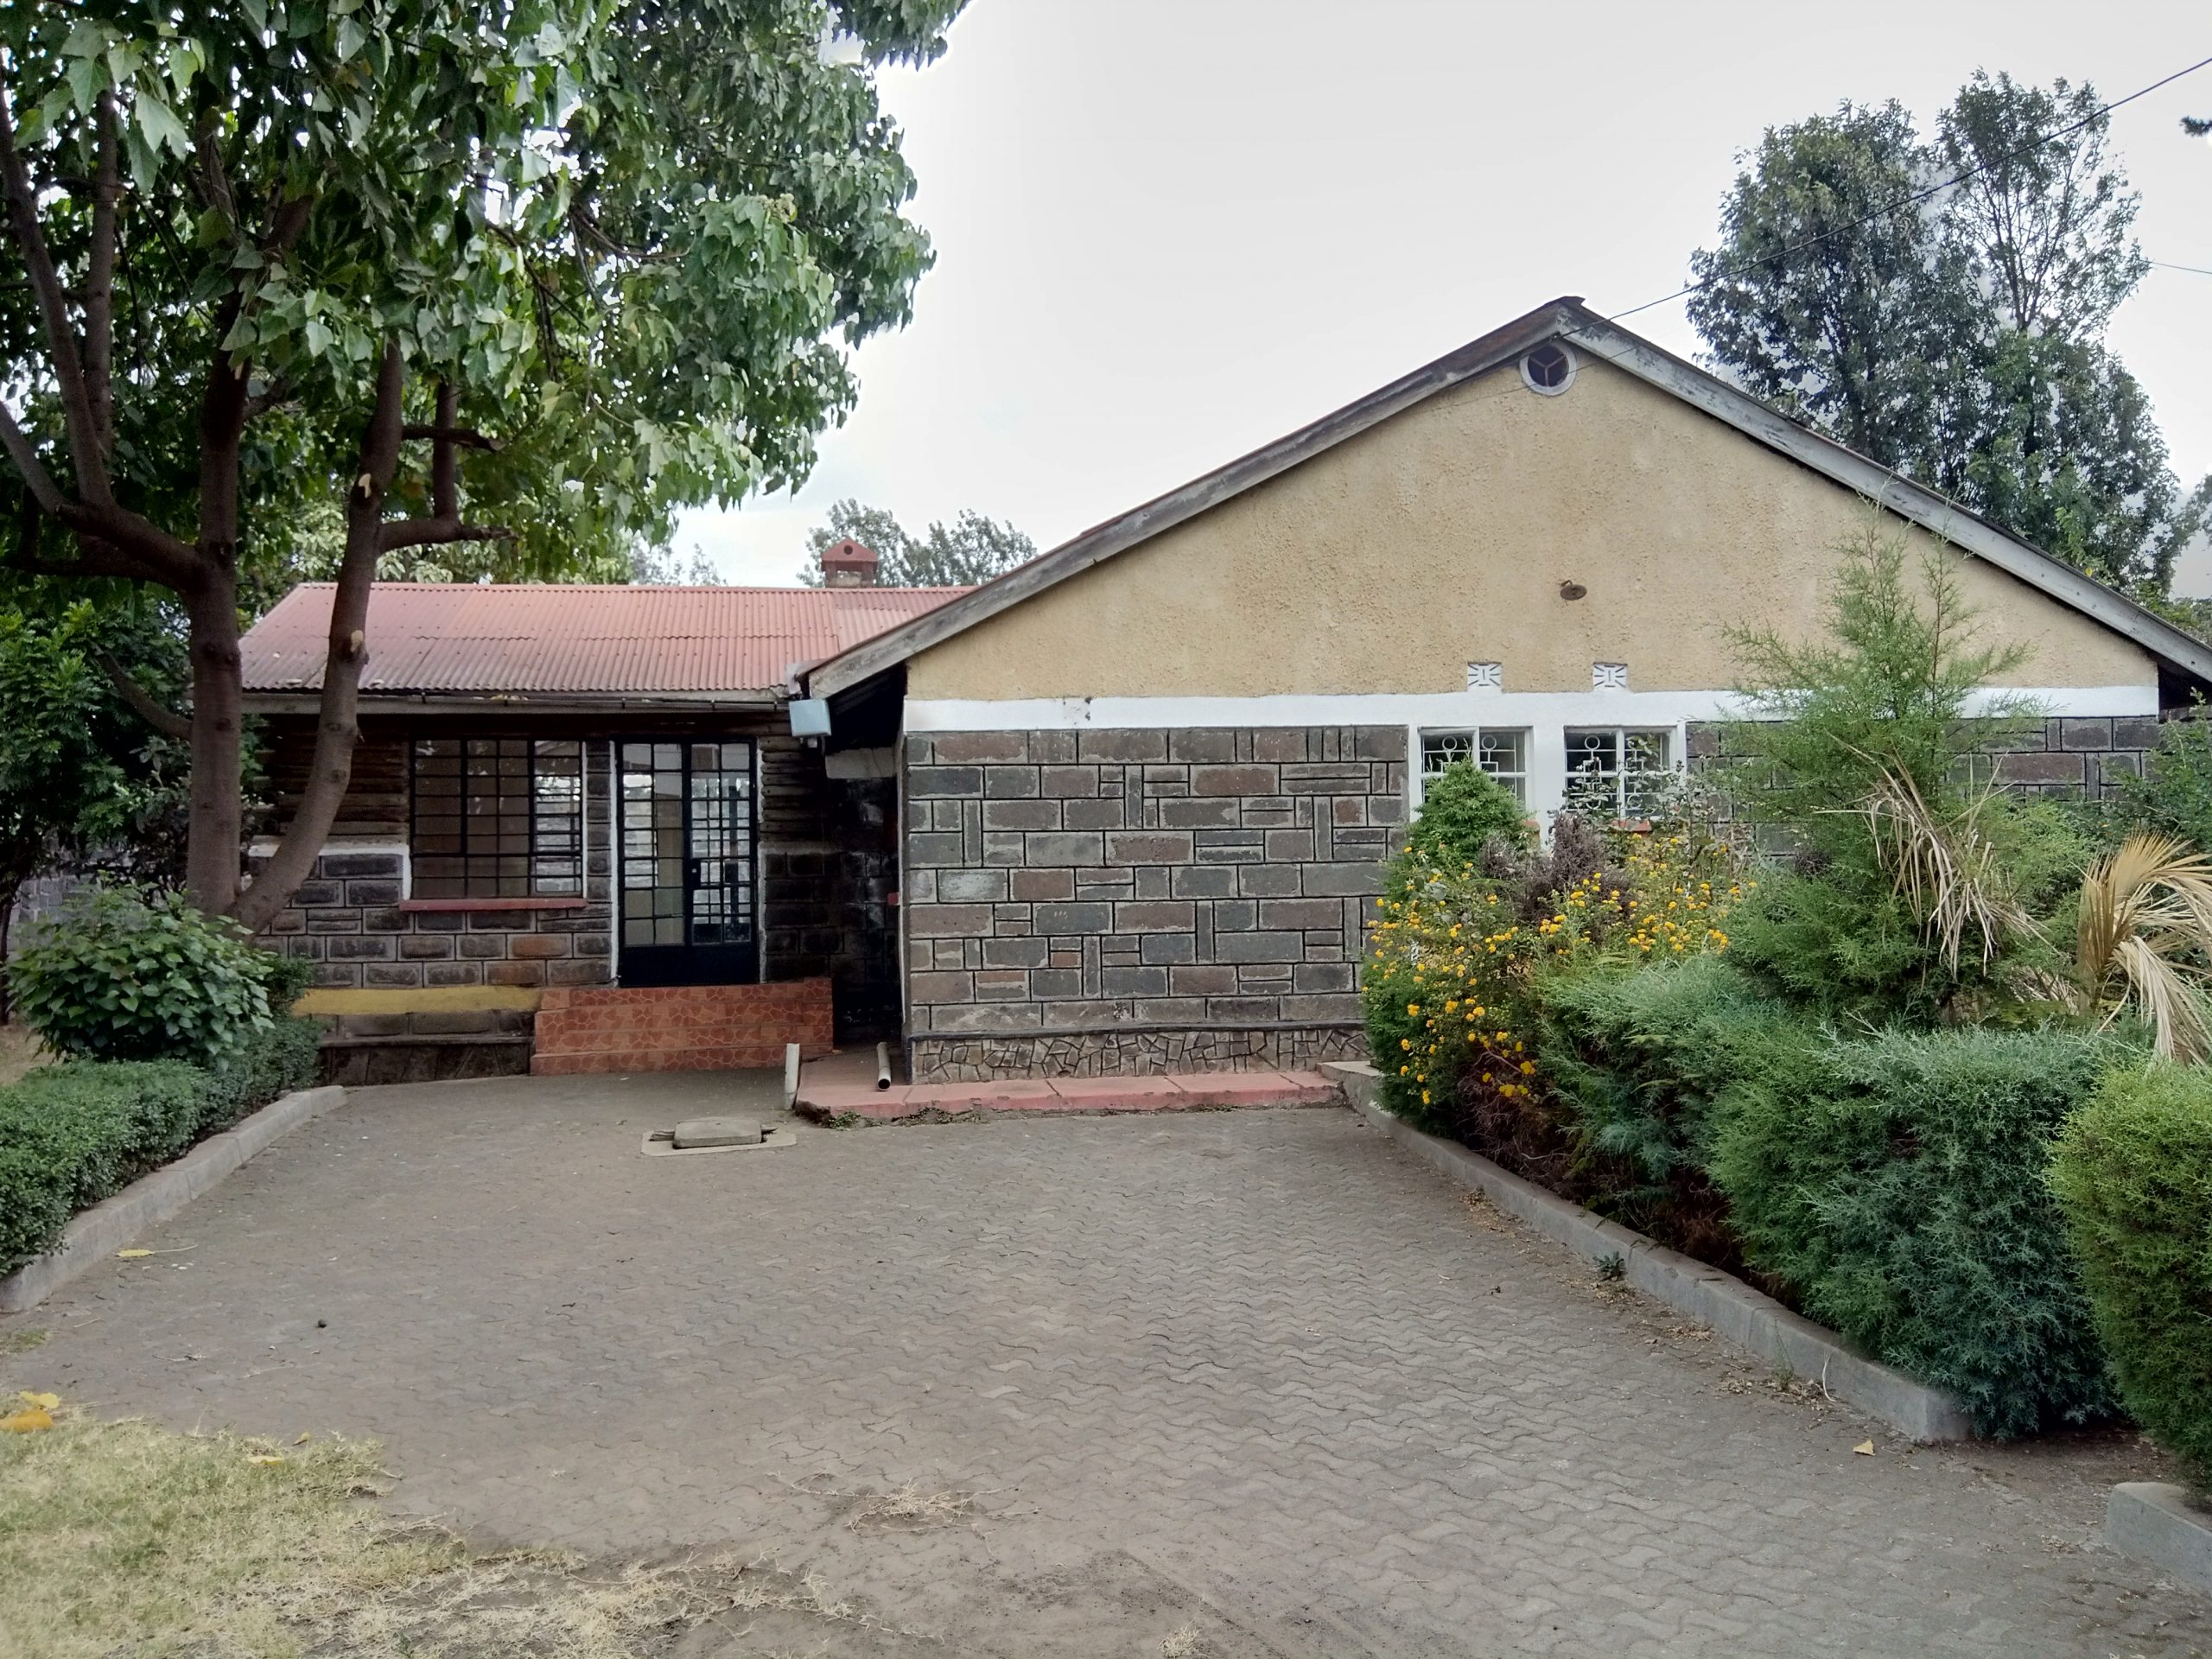 3-BEDROOM BUNGALOW ON ¼ ACRE FOR SALE IN KIAMUNYI